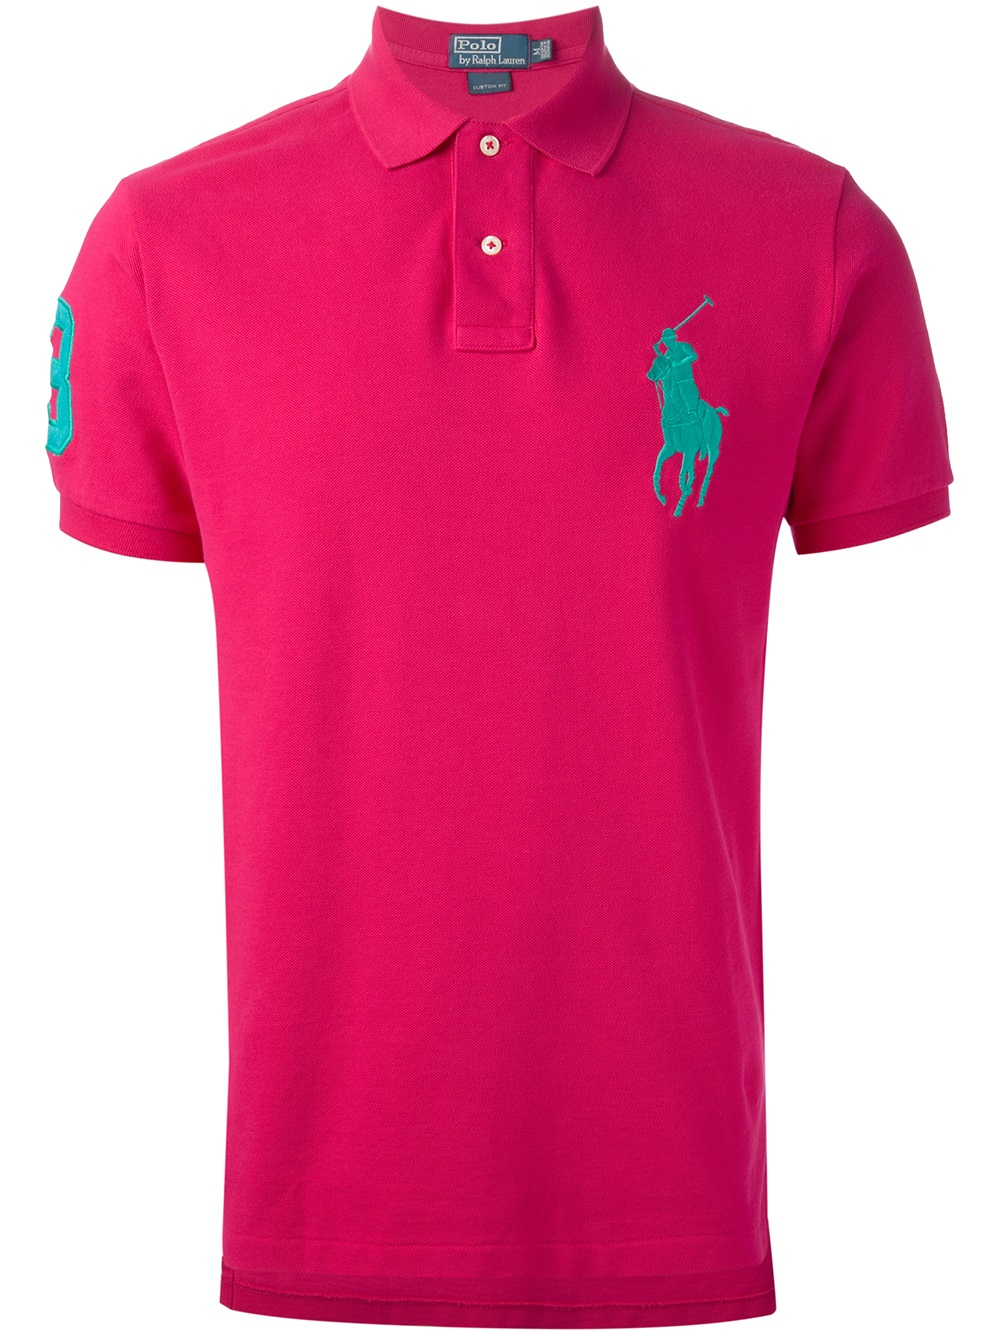 Lyst - Polo Ralph Lauren Classic Polo Shirt in Pink for Men